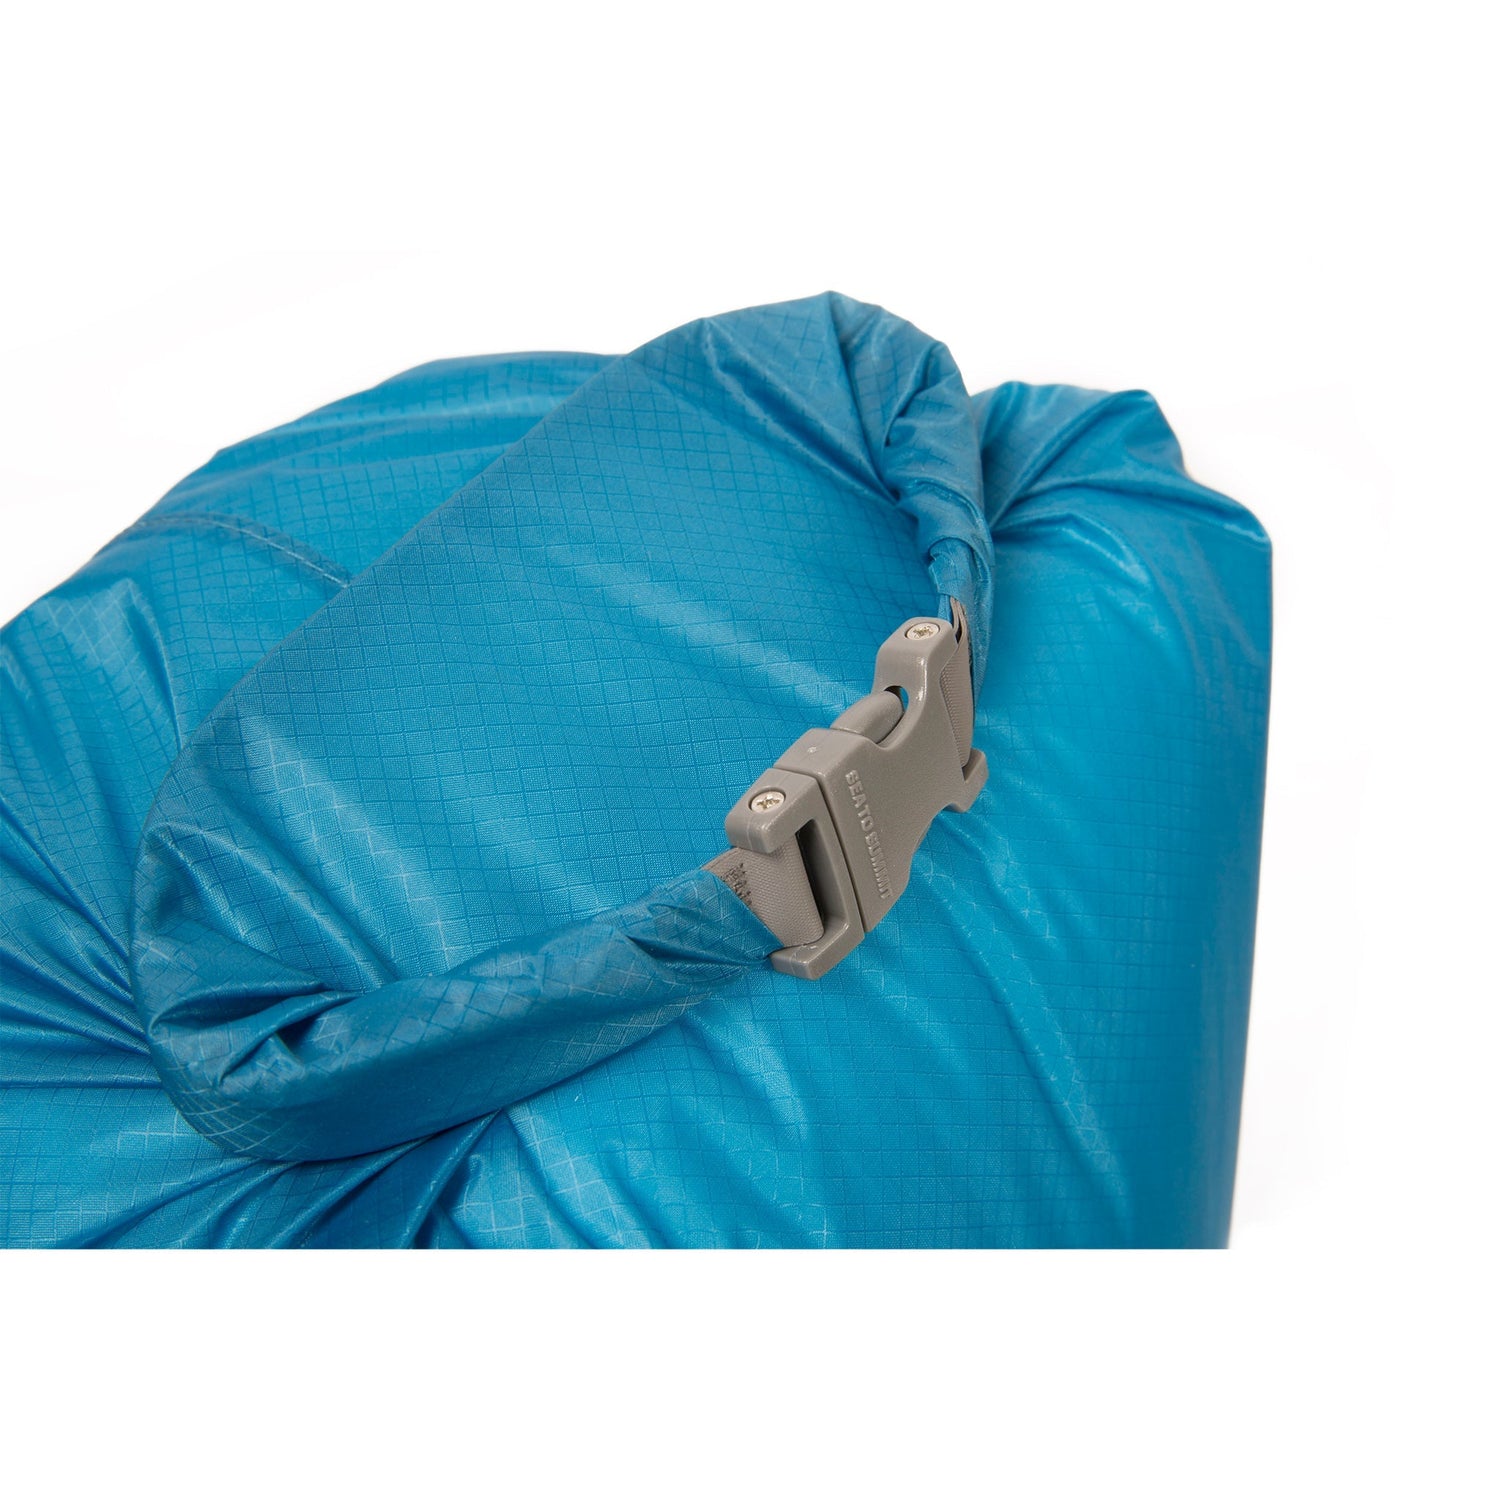 Ultra-Sil Dry Sack (Letzte Chance)